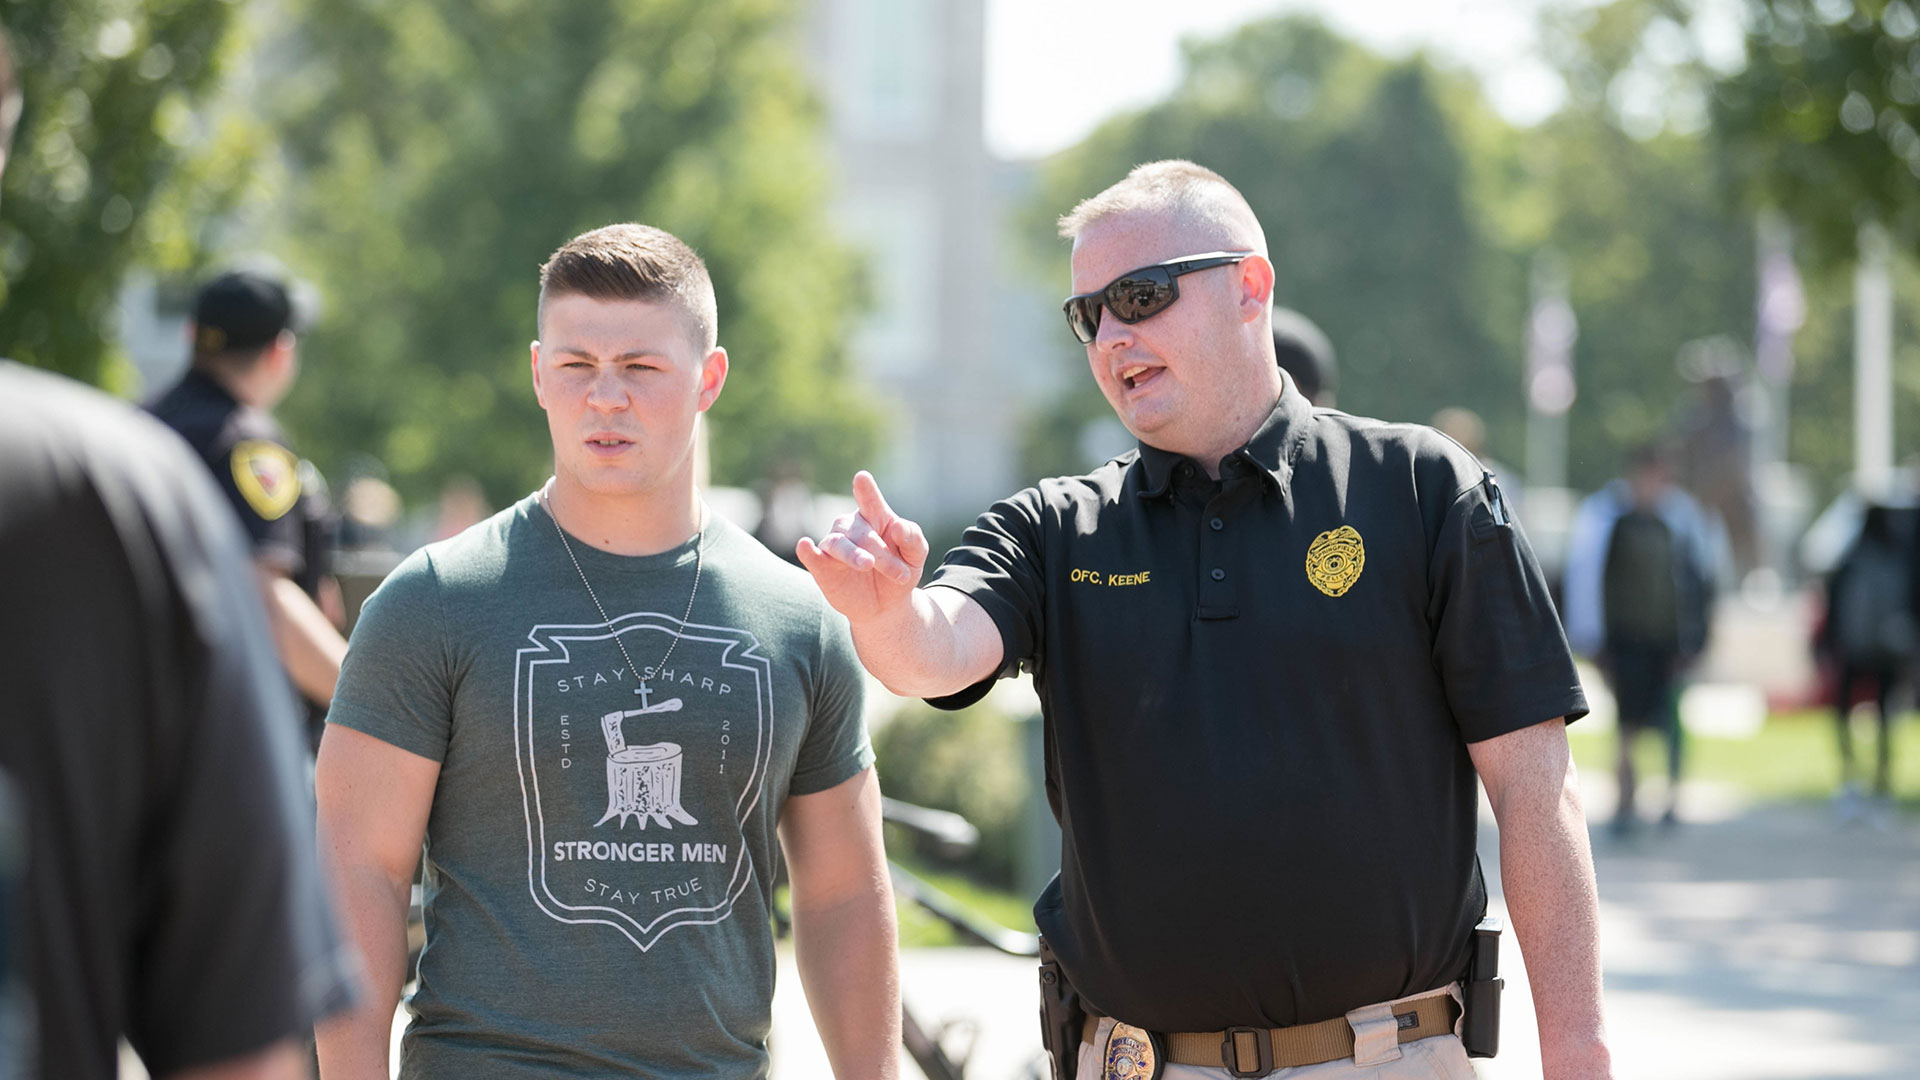 Police officer talking to student during Cops on Campus event.